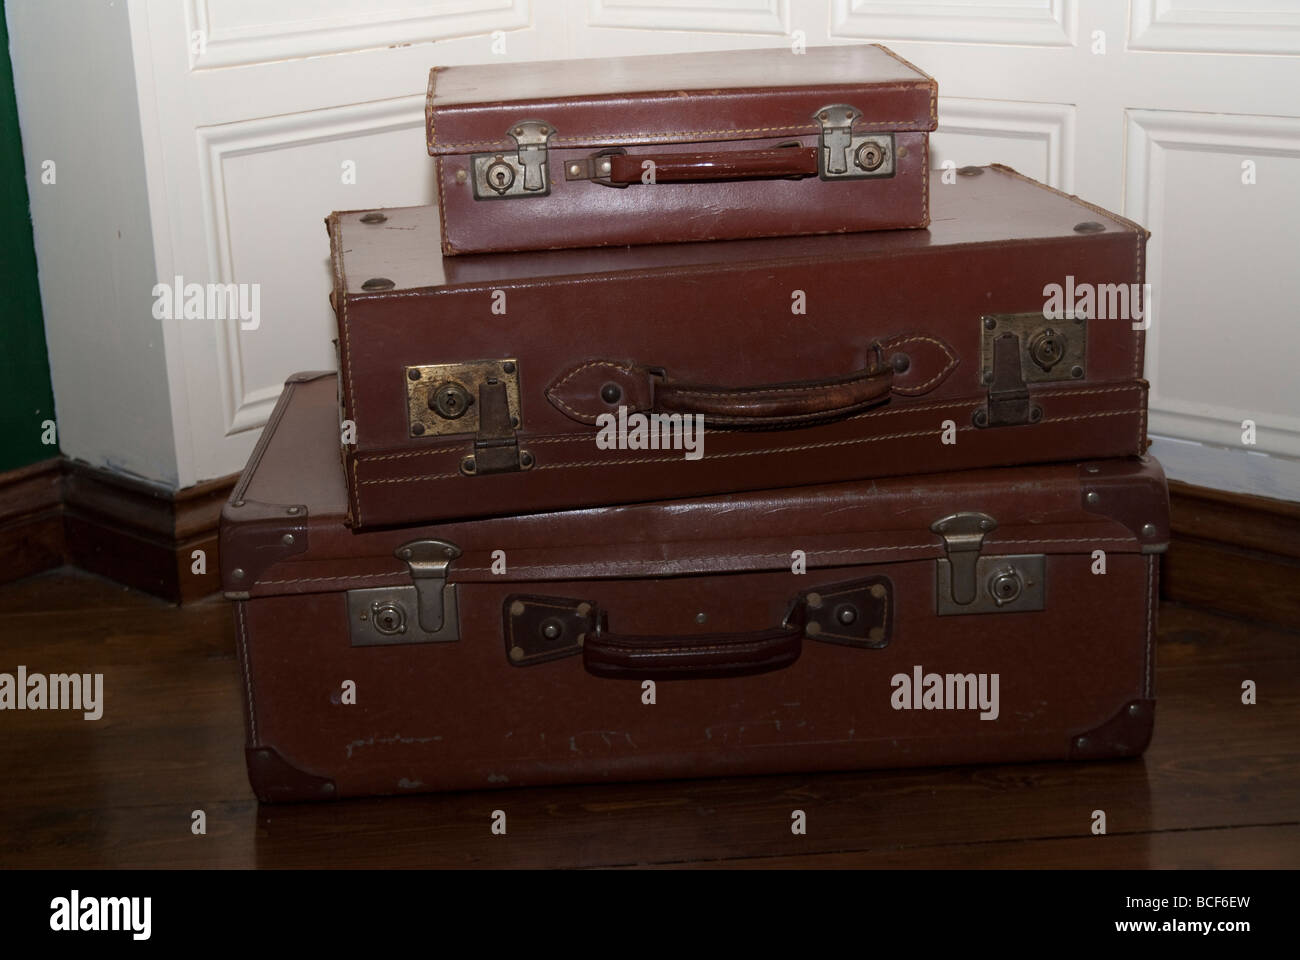 old fashioned suitcases Stock Photo